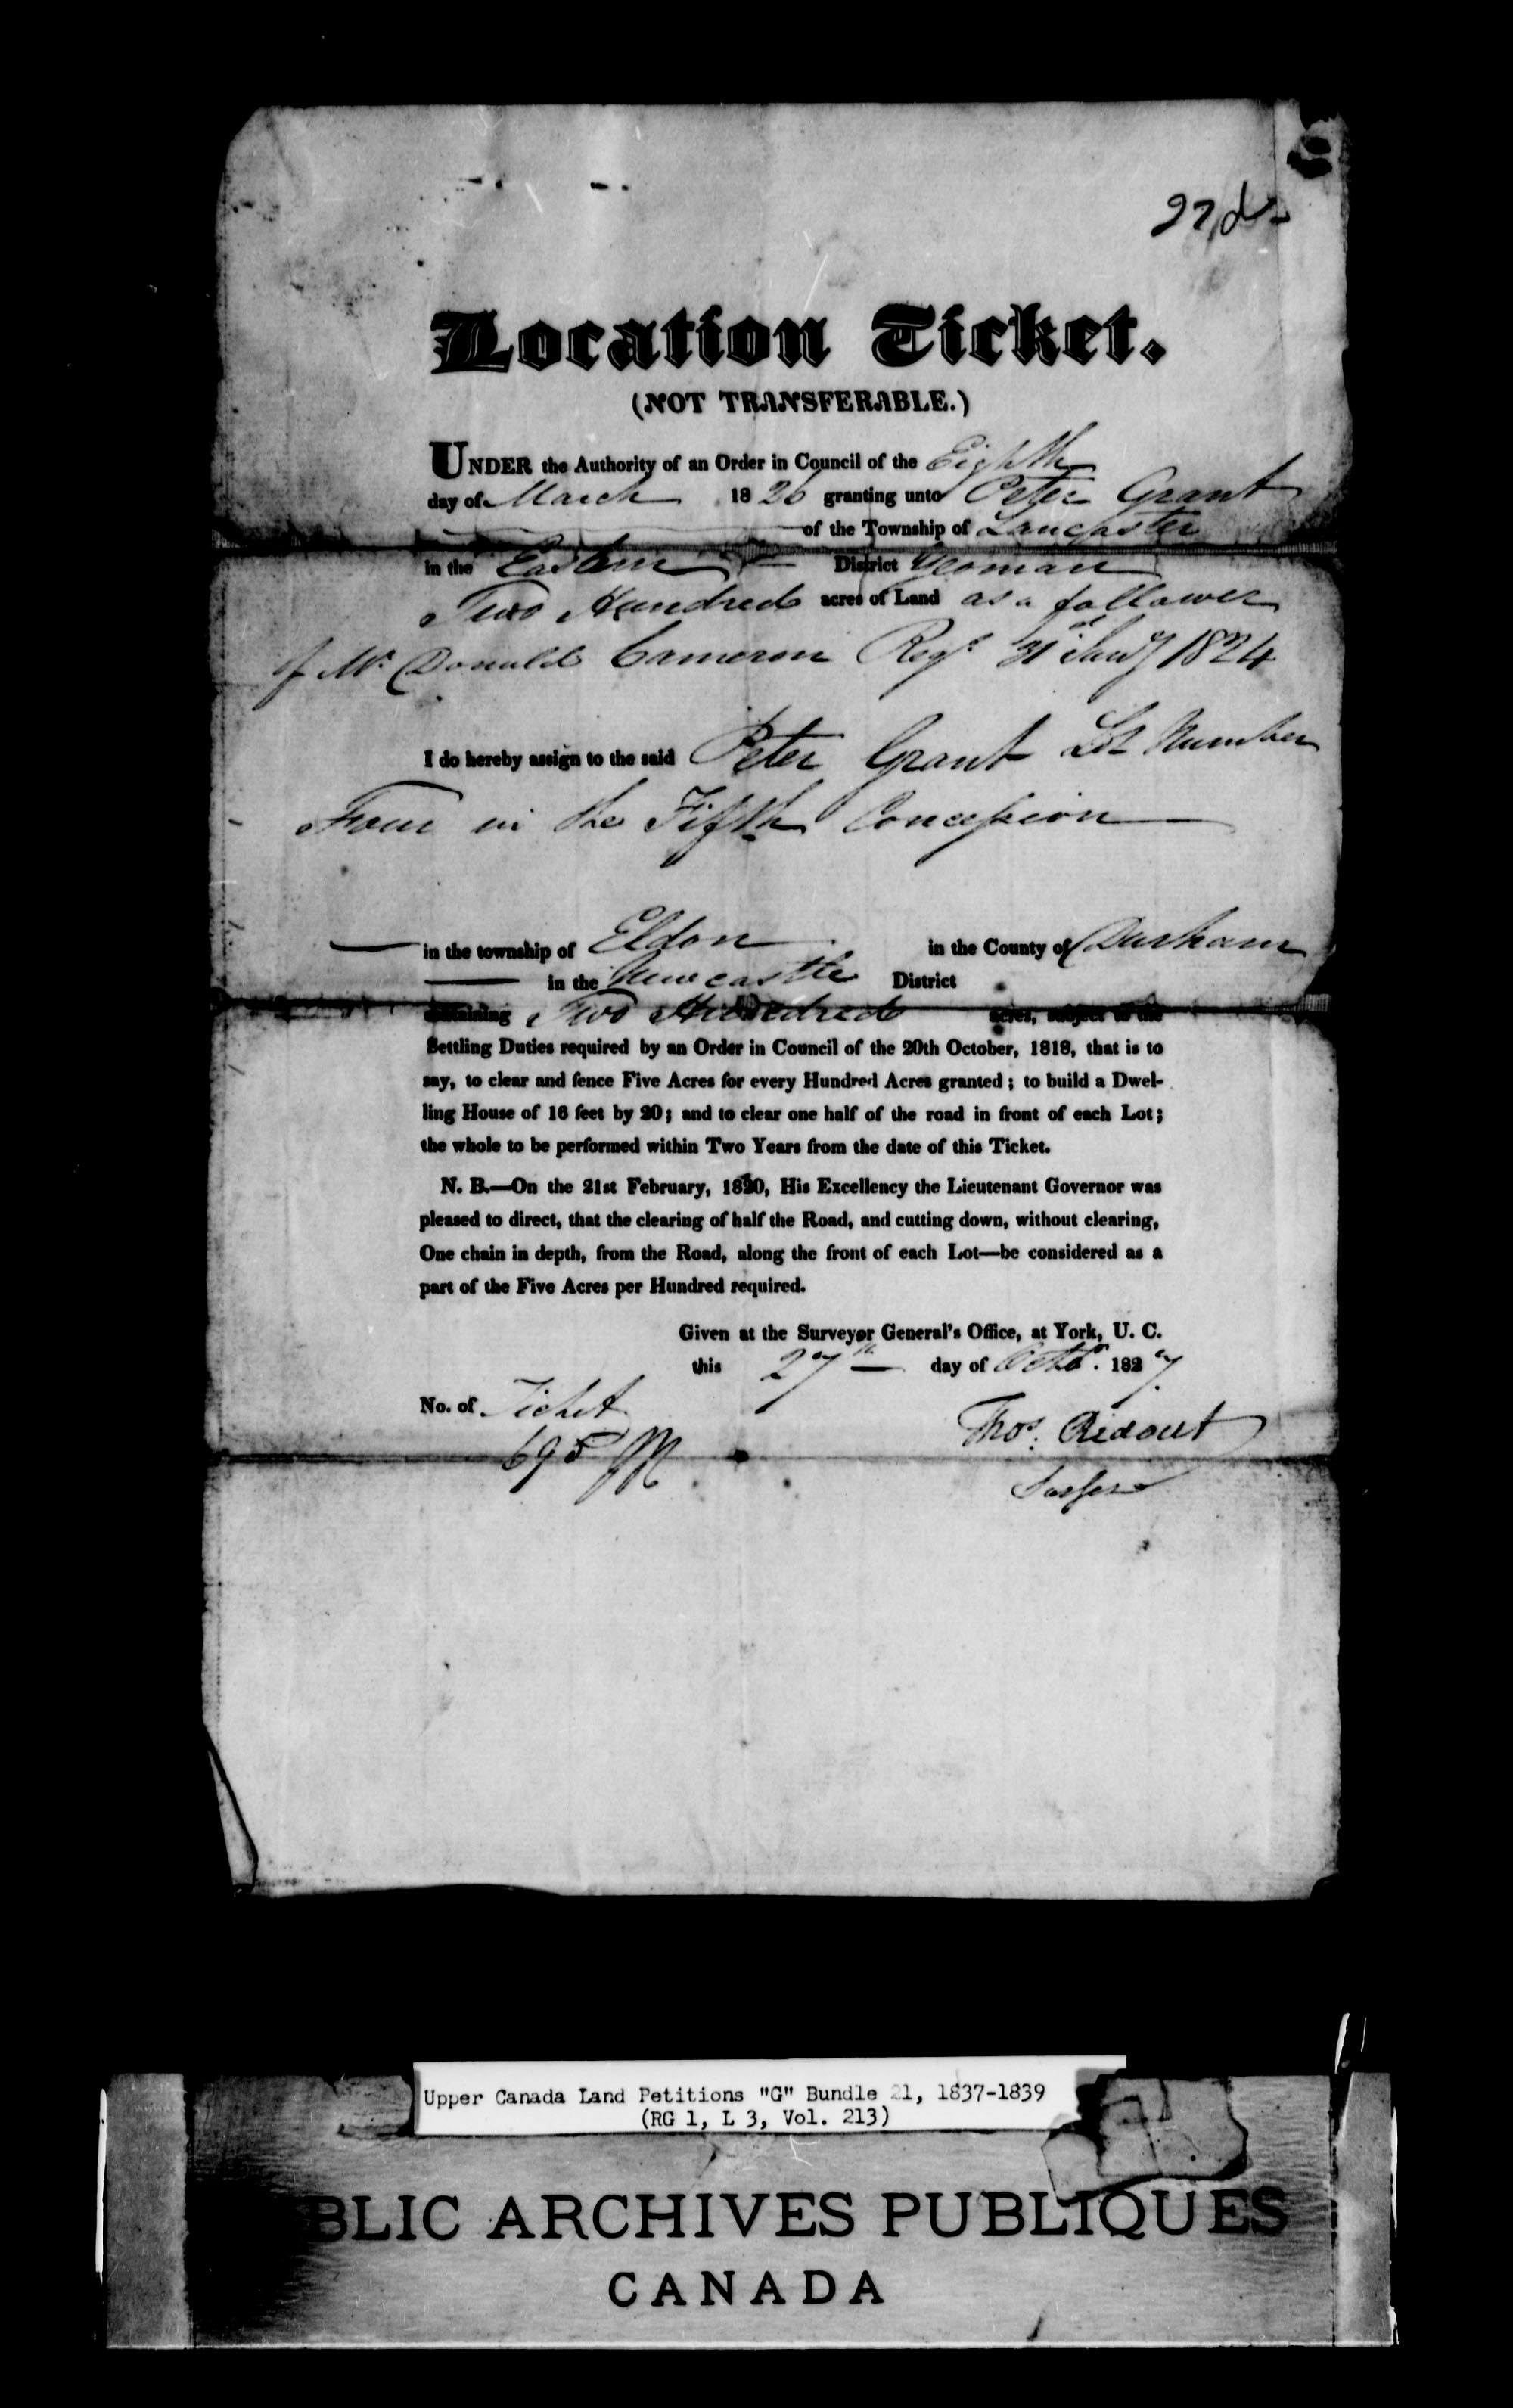 Title: Upper Canada Land Petitions (1763-1865) - Mikan Number: 205131 - Microform: c-2036